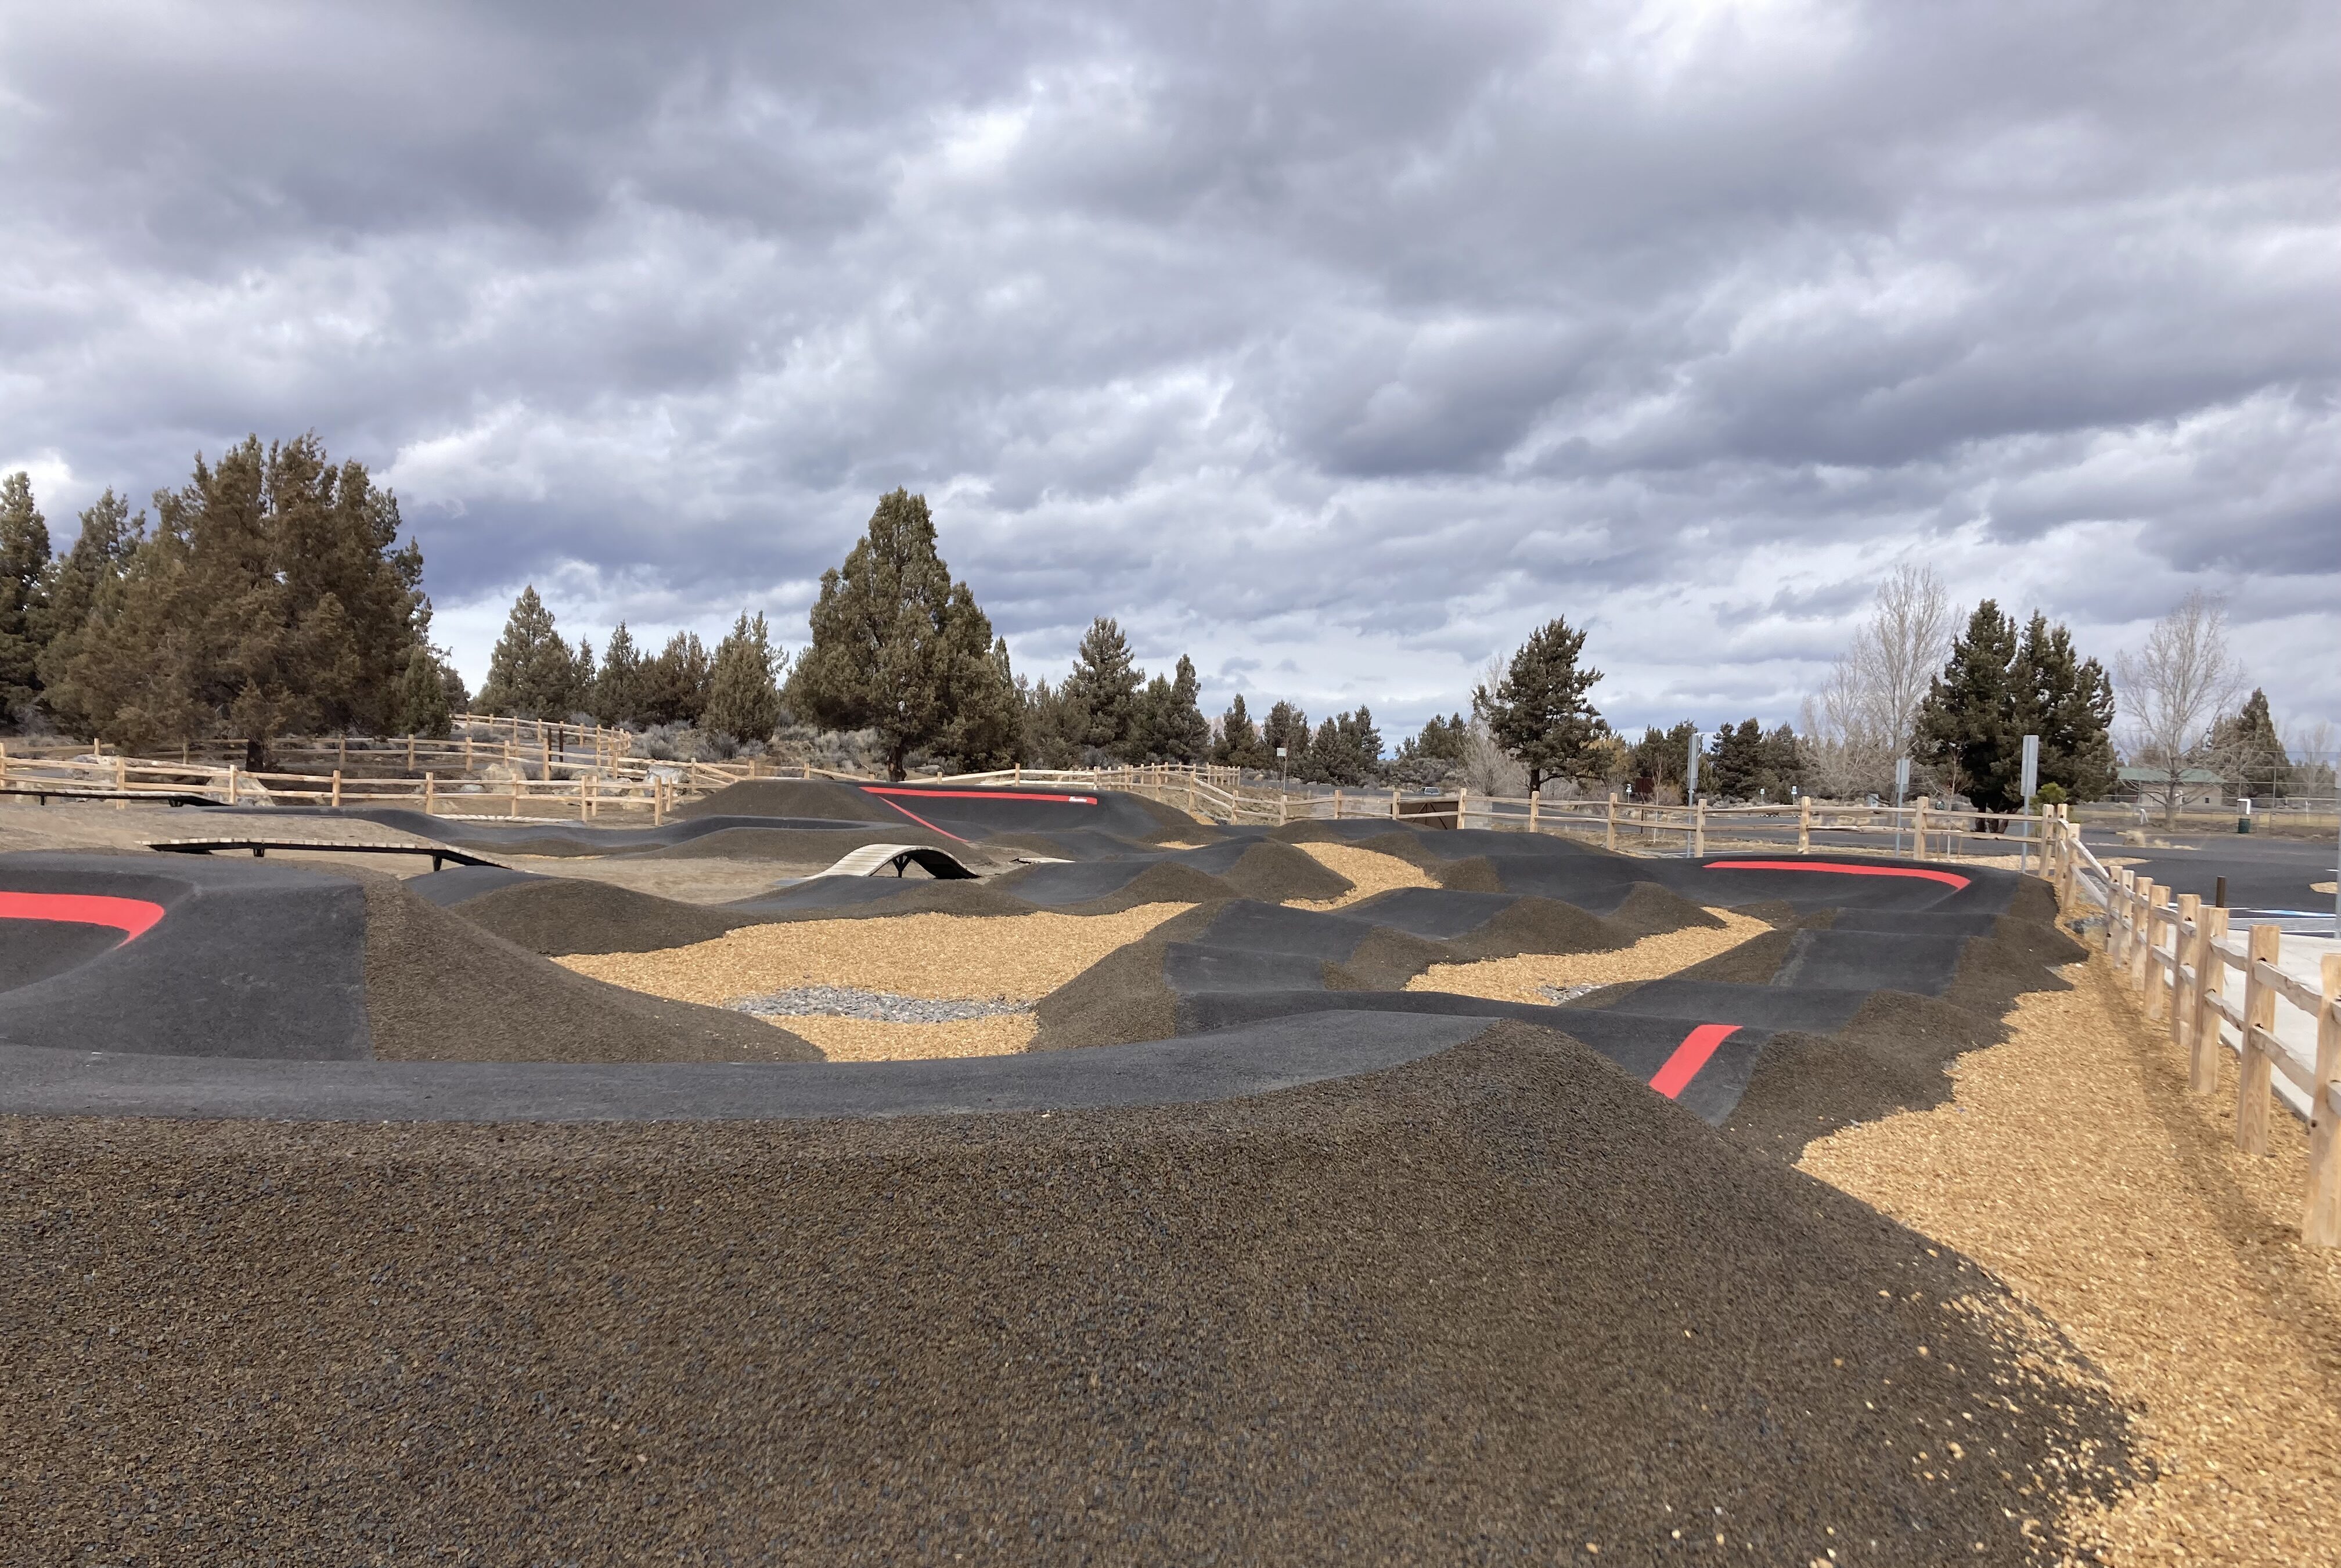 Ground view of the new Big Sky pump track